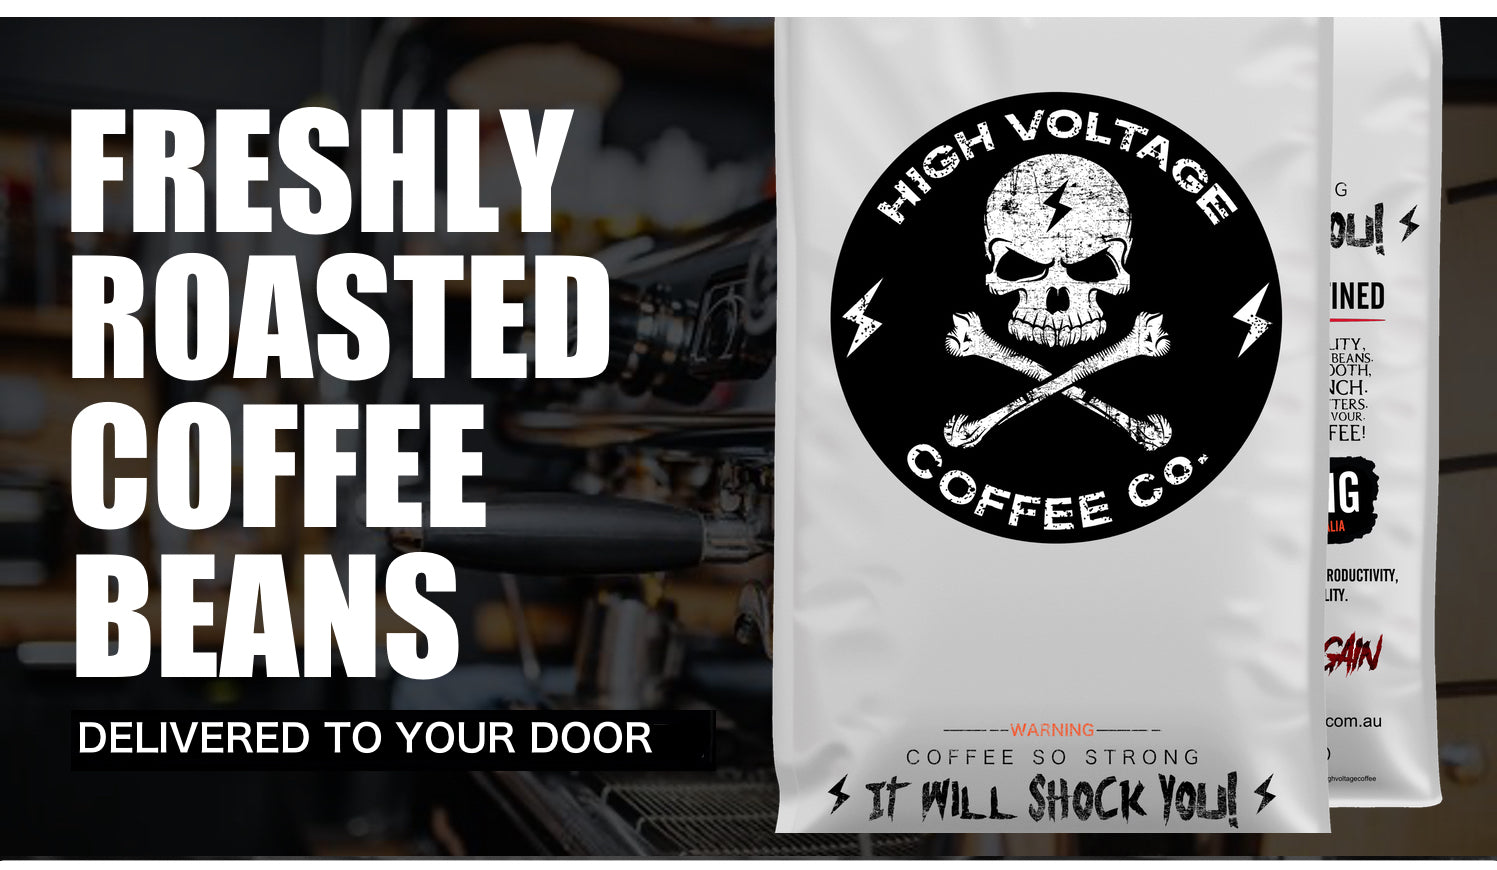 Australia's #1 Strong Coffee ☕ Delivered Fast & Fresh to your doorstep no matter where you reside. FREE Shipping on orders $75 and over. Coffee Beans Near Me, Best Rated Coffee Beans, Best Coffee Beans, Australian Coffee Beans, Australian Coffee Roasters 